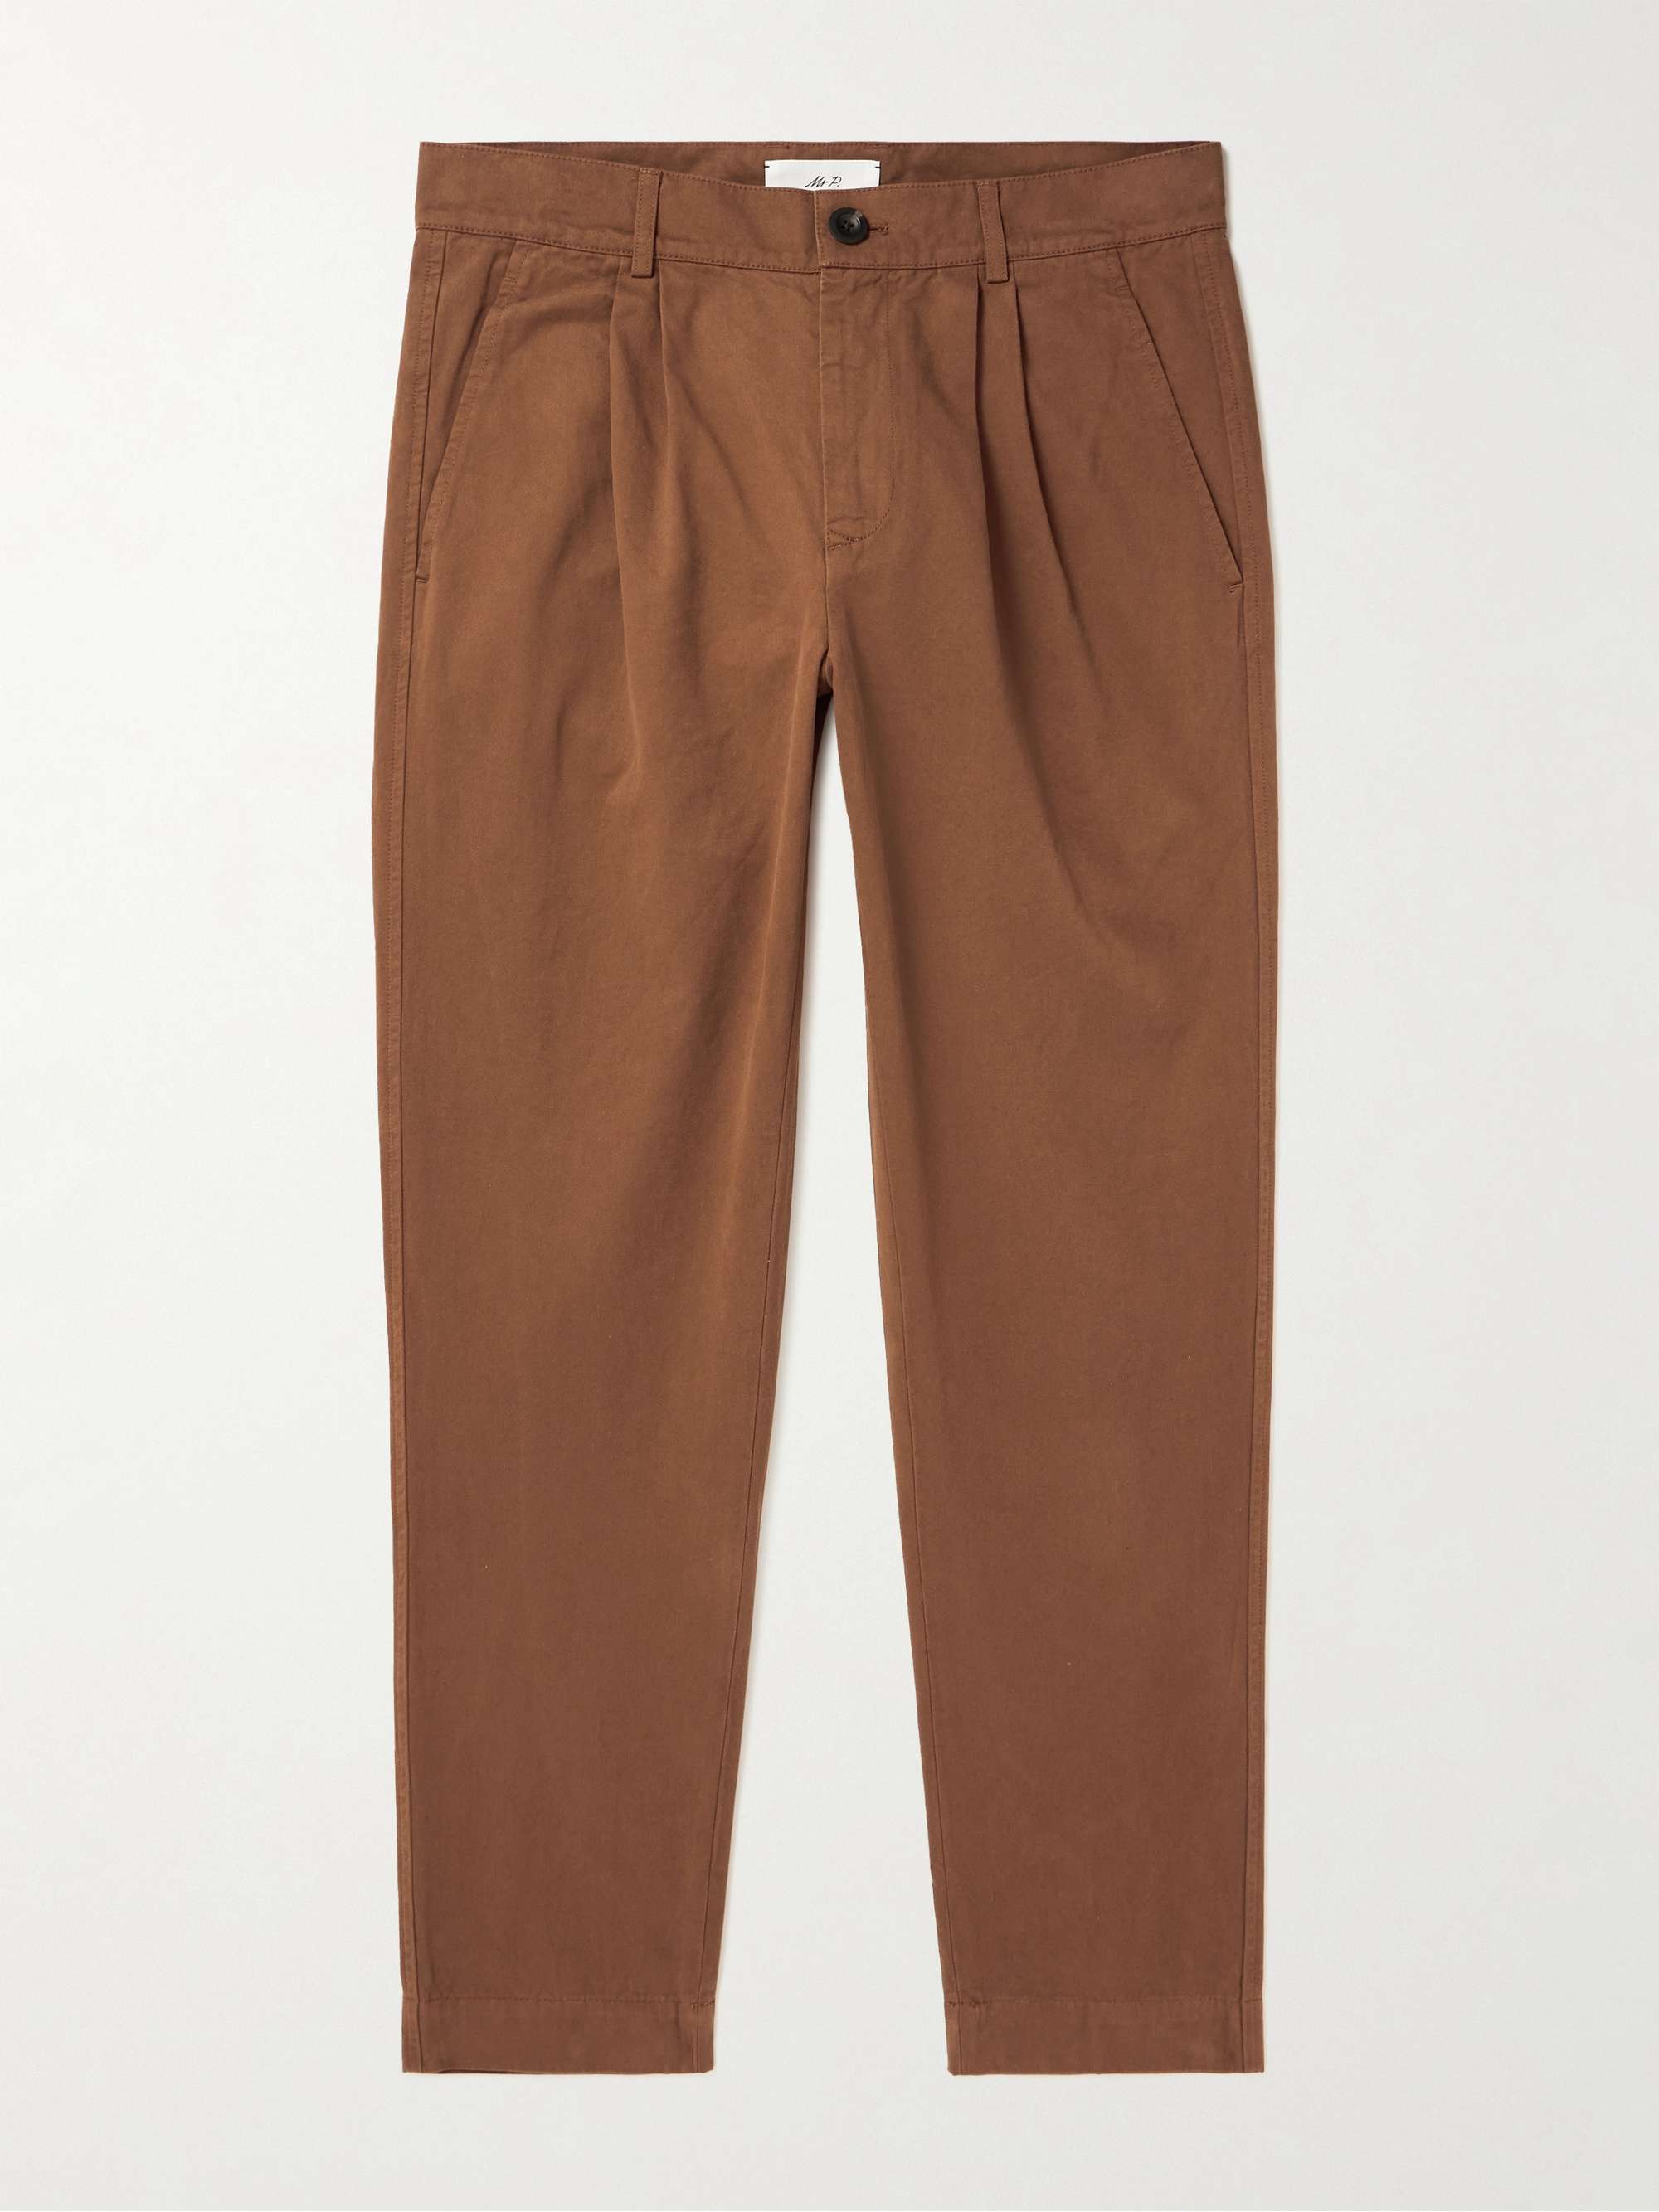 MR P. Tapered Garment-Dyed Pleated Cotton-Twill Trousers for Men